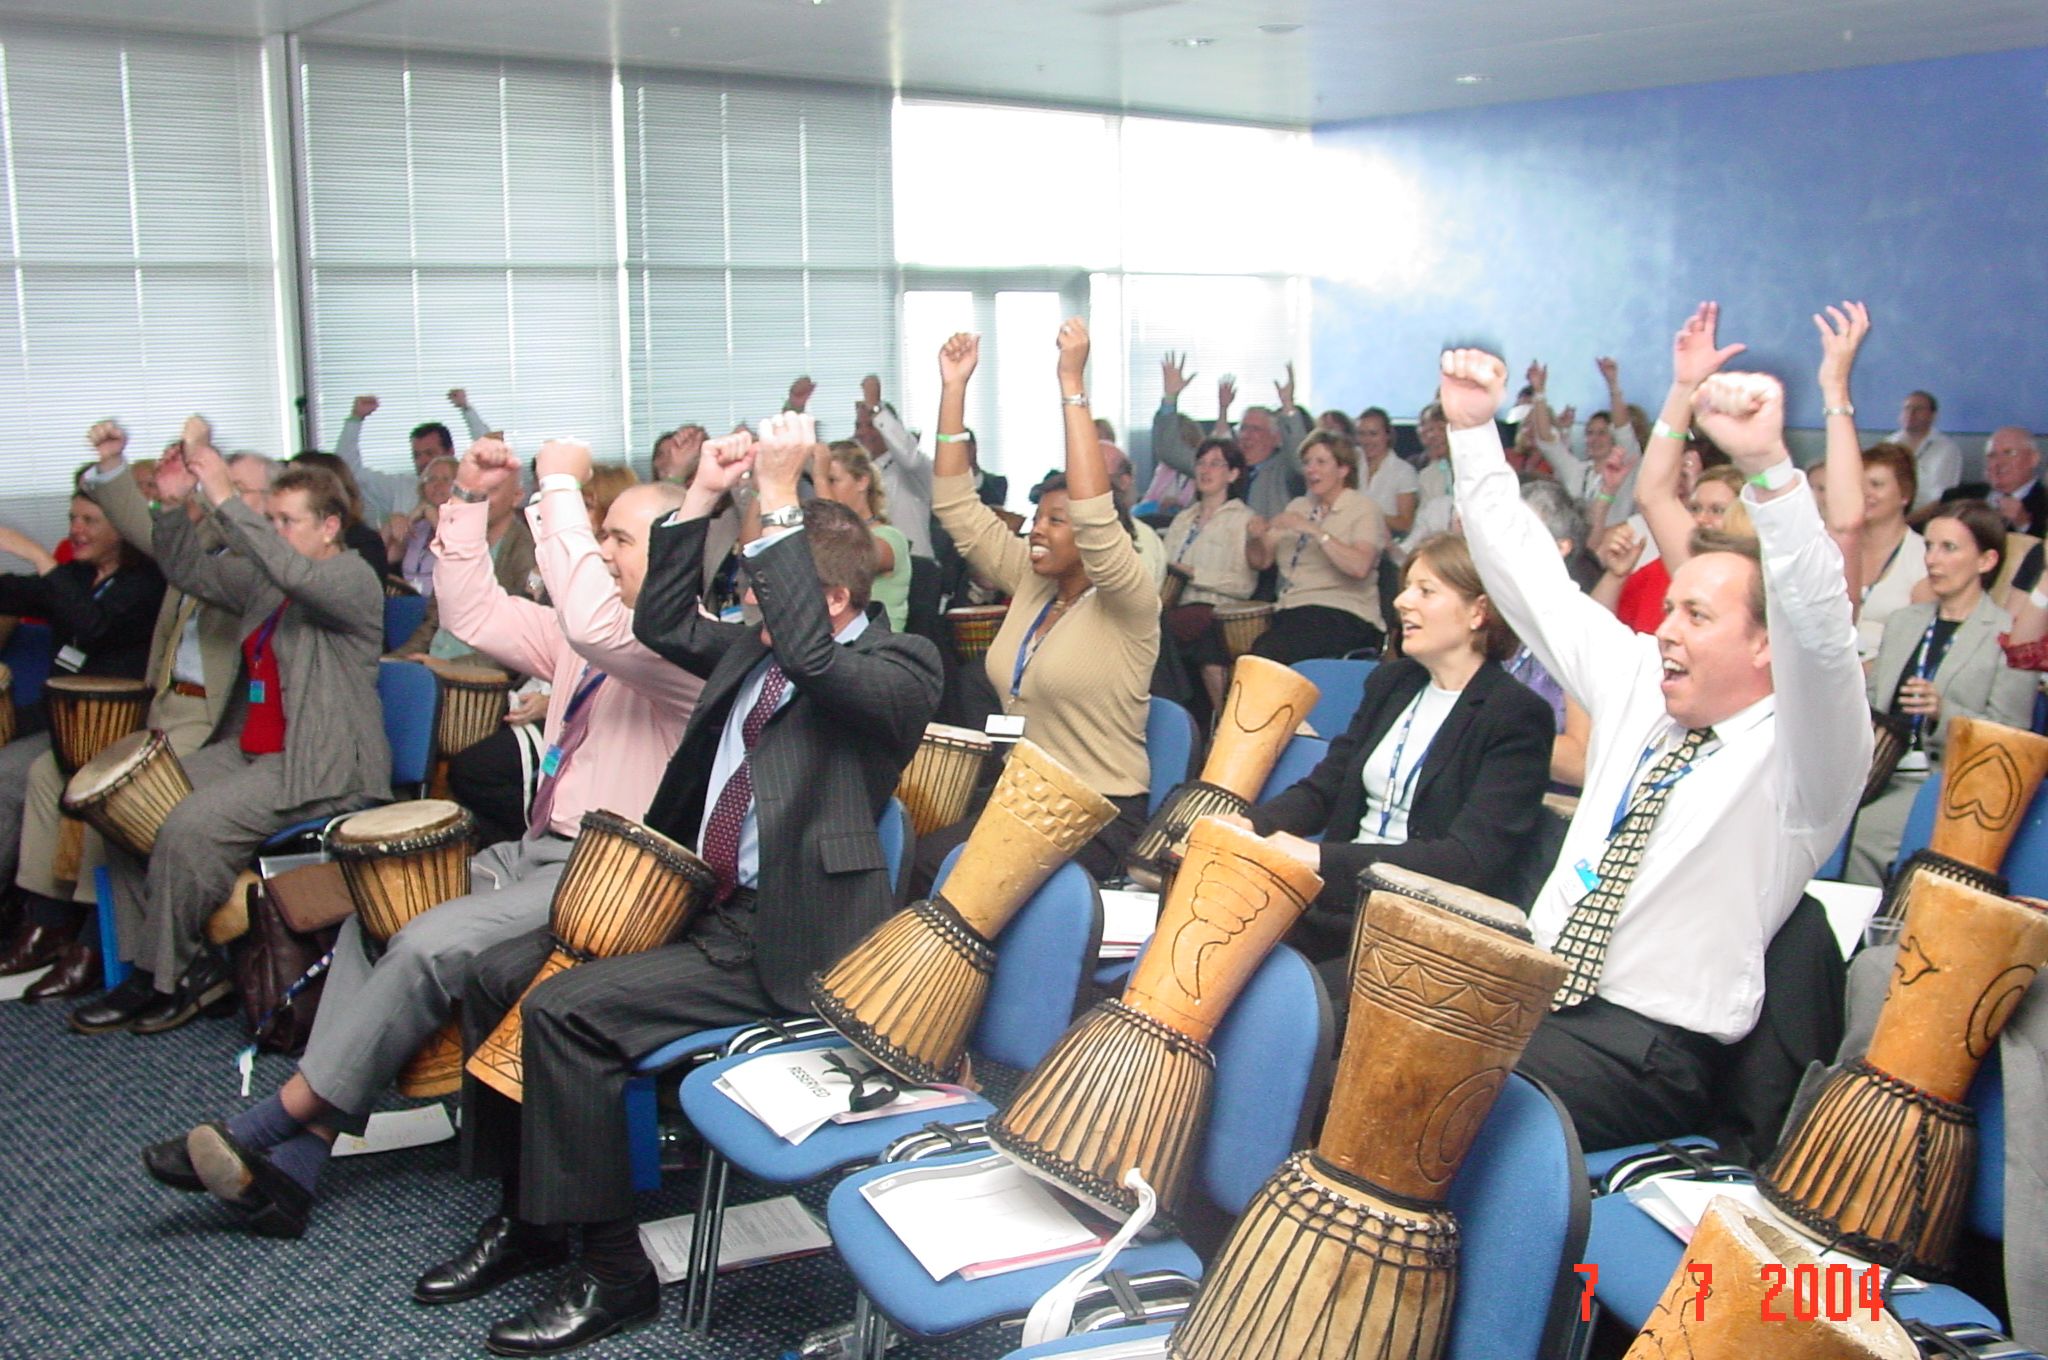 interactive Drumming is an ideal Team building exercise to create Unity among your team